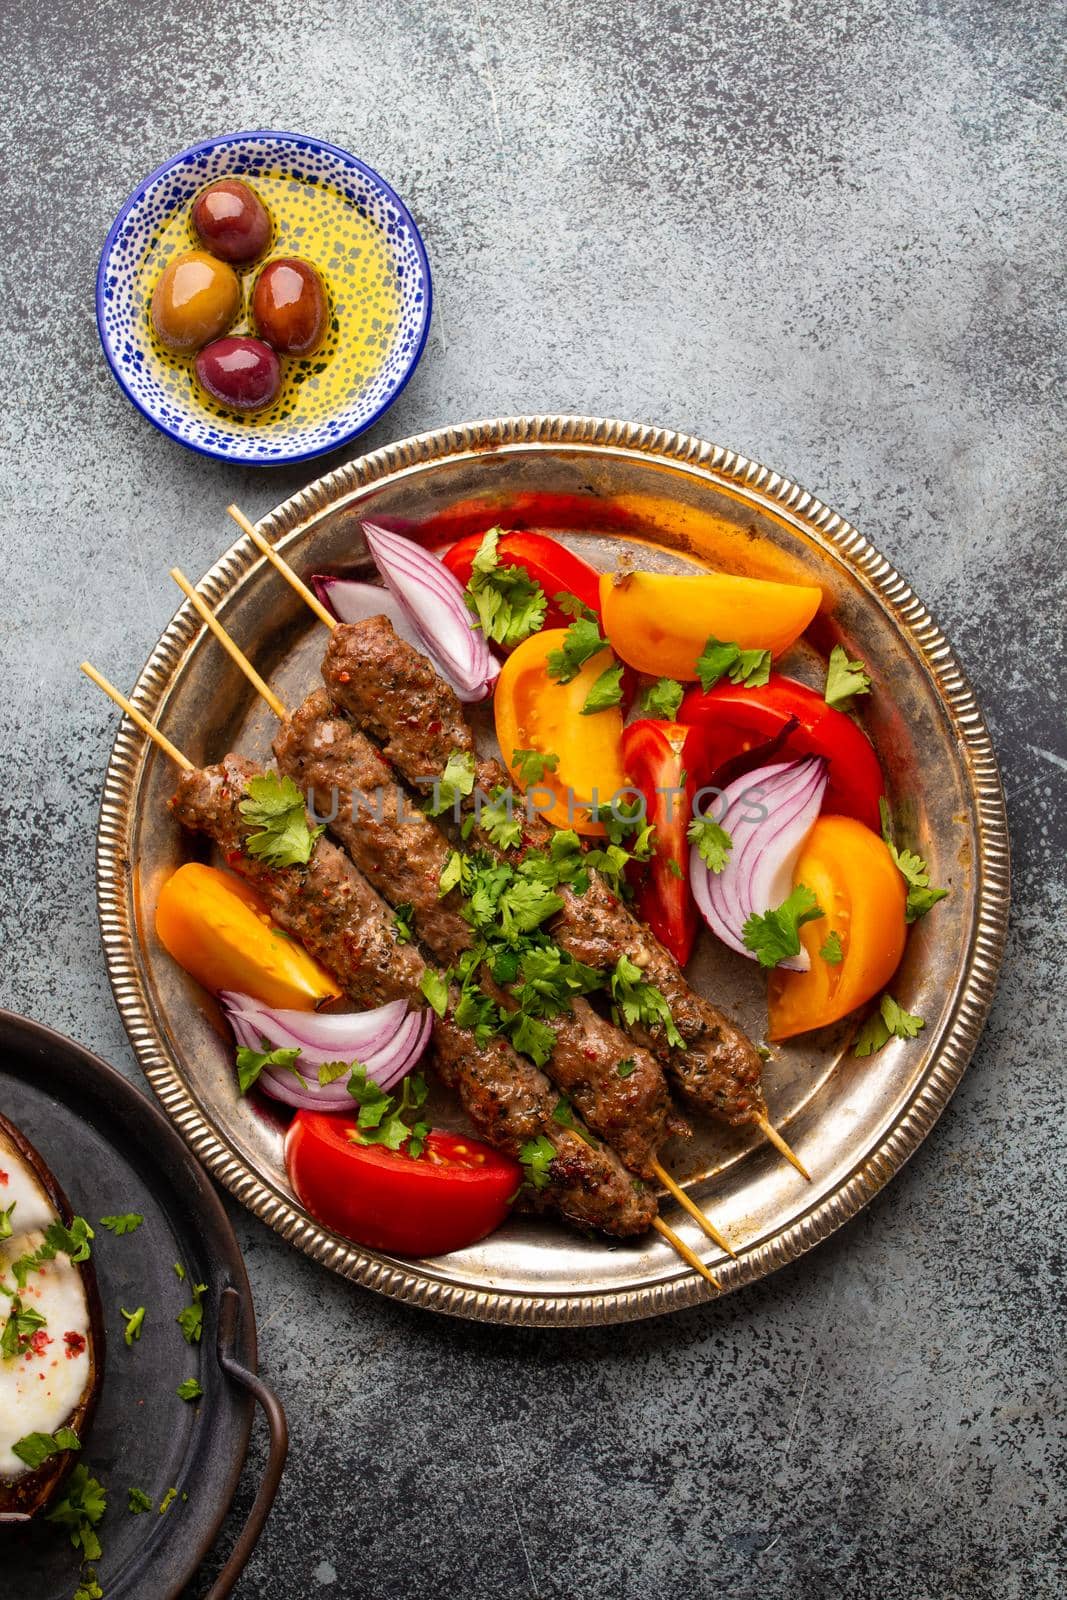 Delicious meat kebab with fresh vegetable salad by its_al_dente